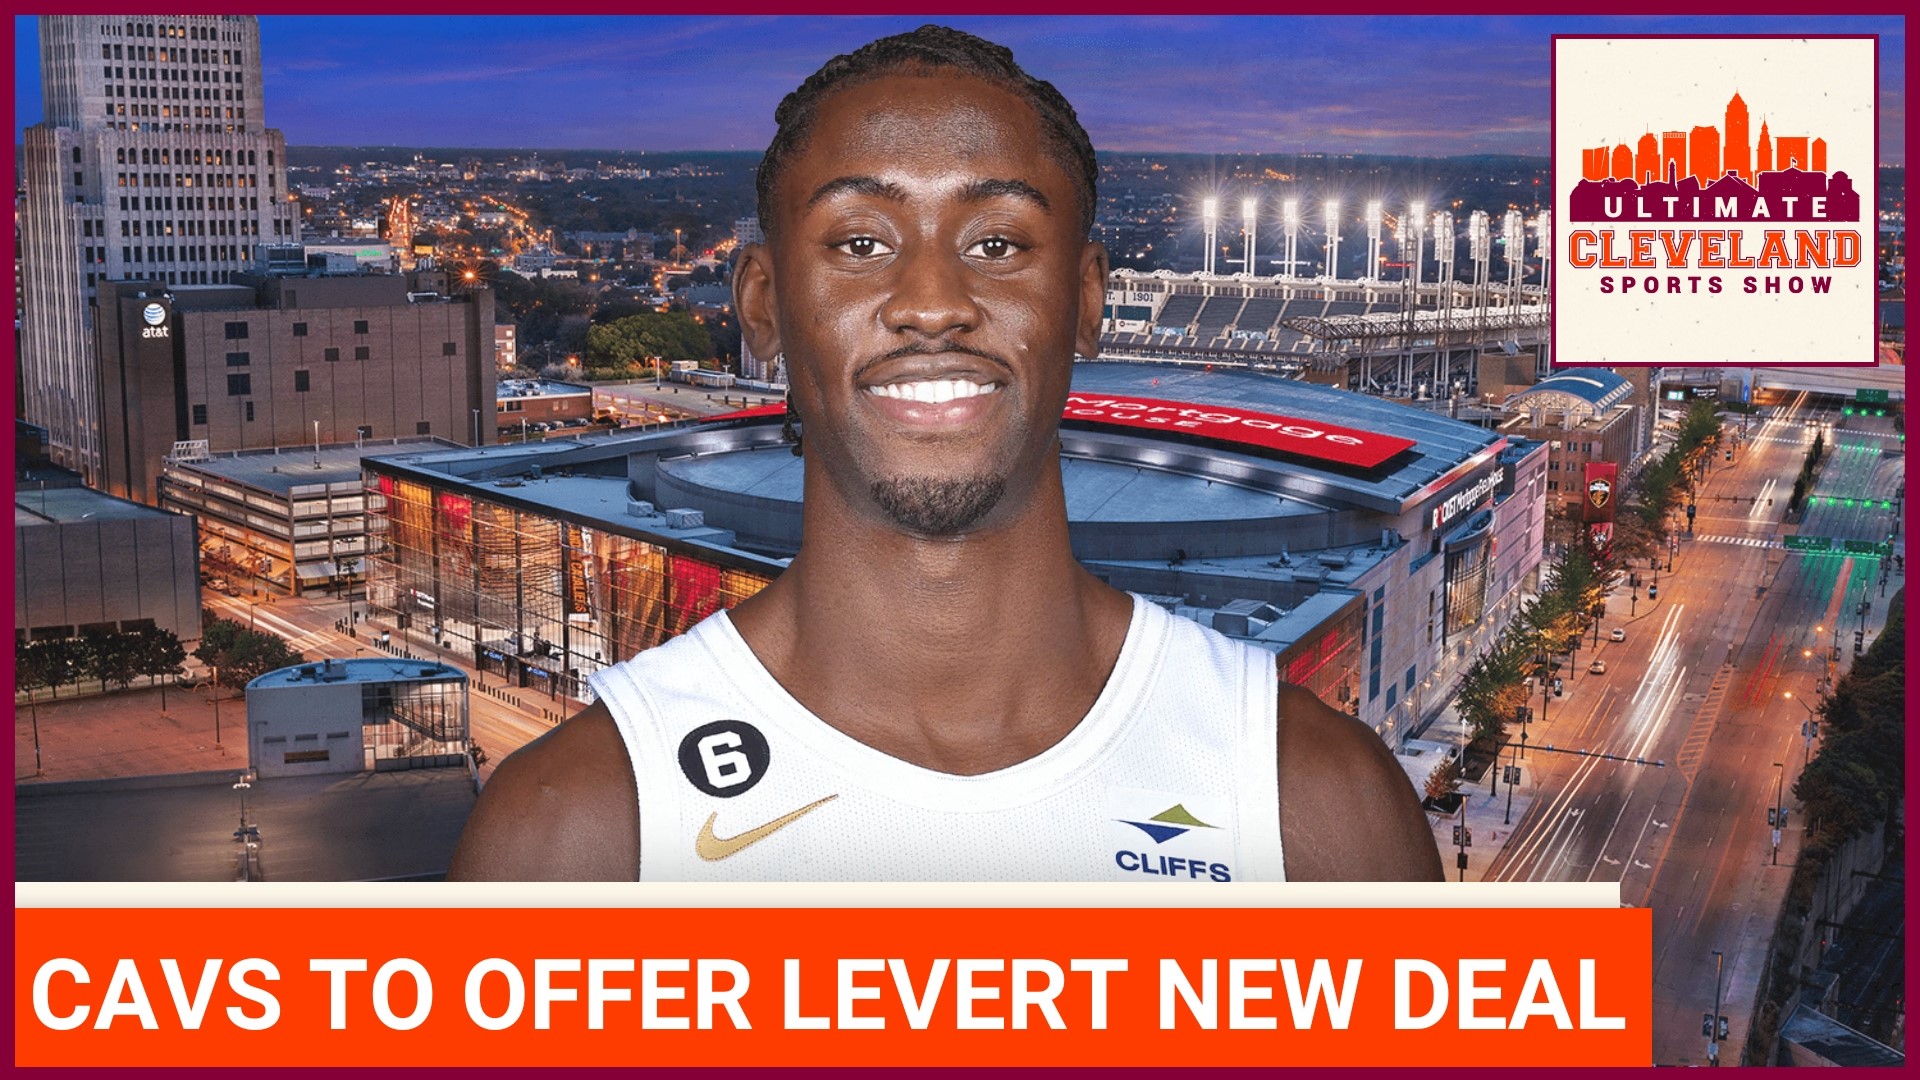 Is Caris Levert staying with the Cleveland Cavaliers? With new CBA rules kicking in July 1st is there any reason not to resign Caris Levert? The UCSS panel breaks...